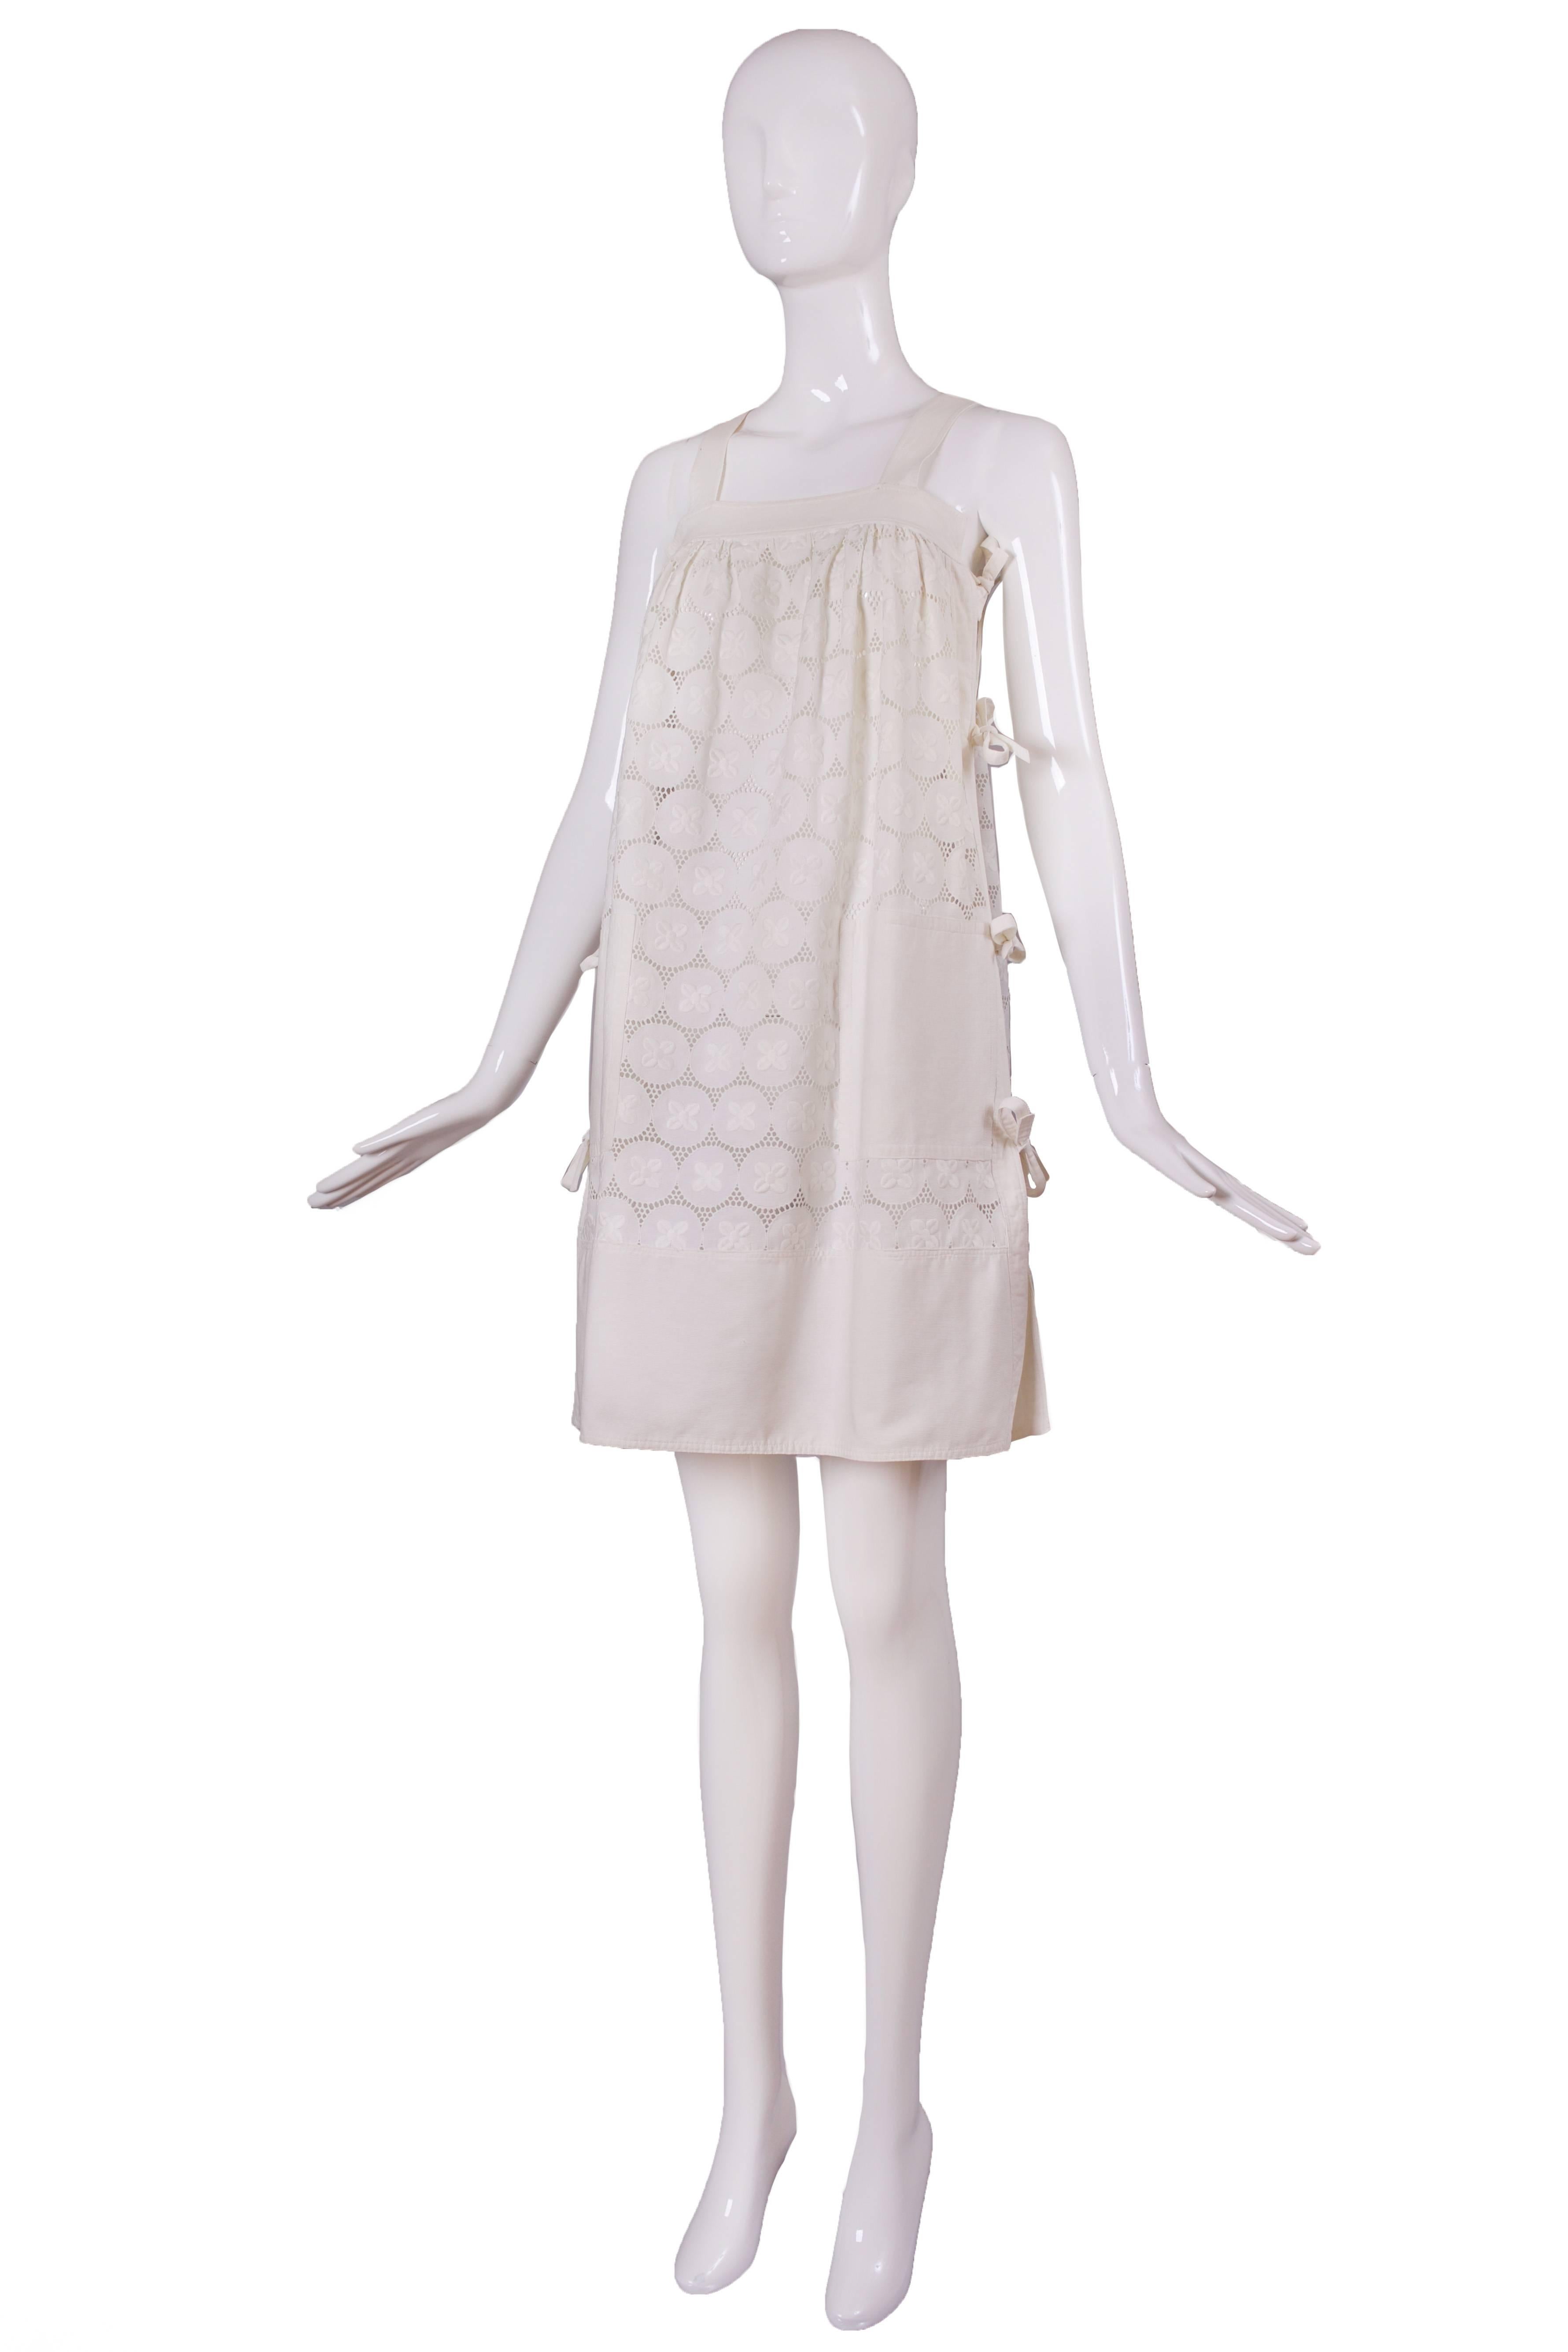 Vintage Courreges white eyelet 100% cotton sundress with a bateau style neckline. The eyelet is formed from conjoining ribbed cotton circles with an embroidered flower at the center and with crocheted lace or some form of lace in between. Each side